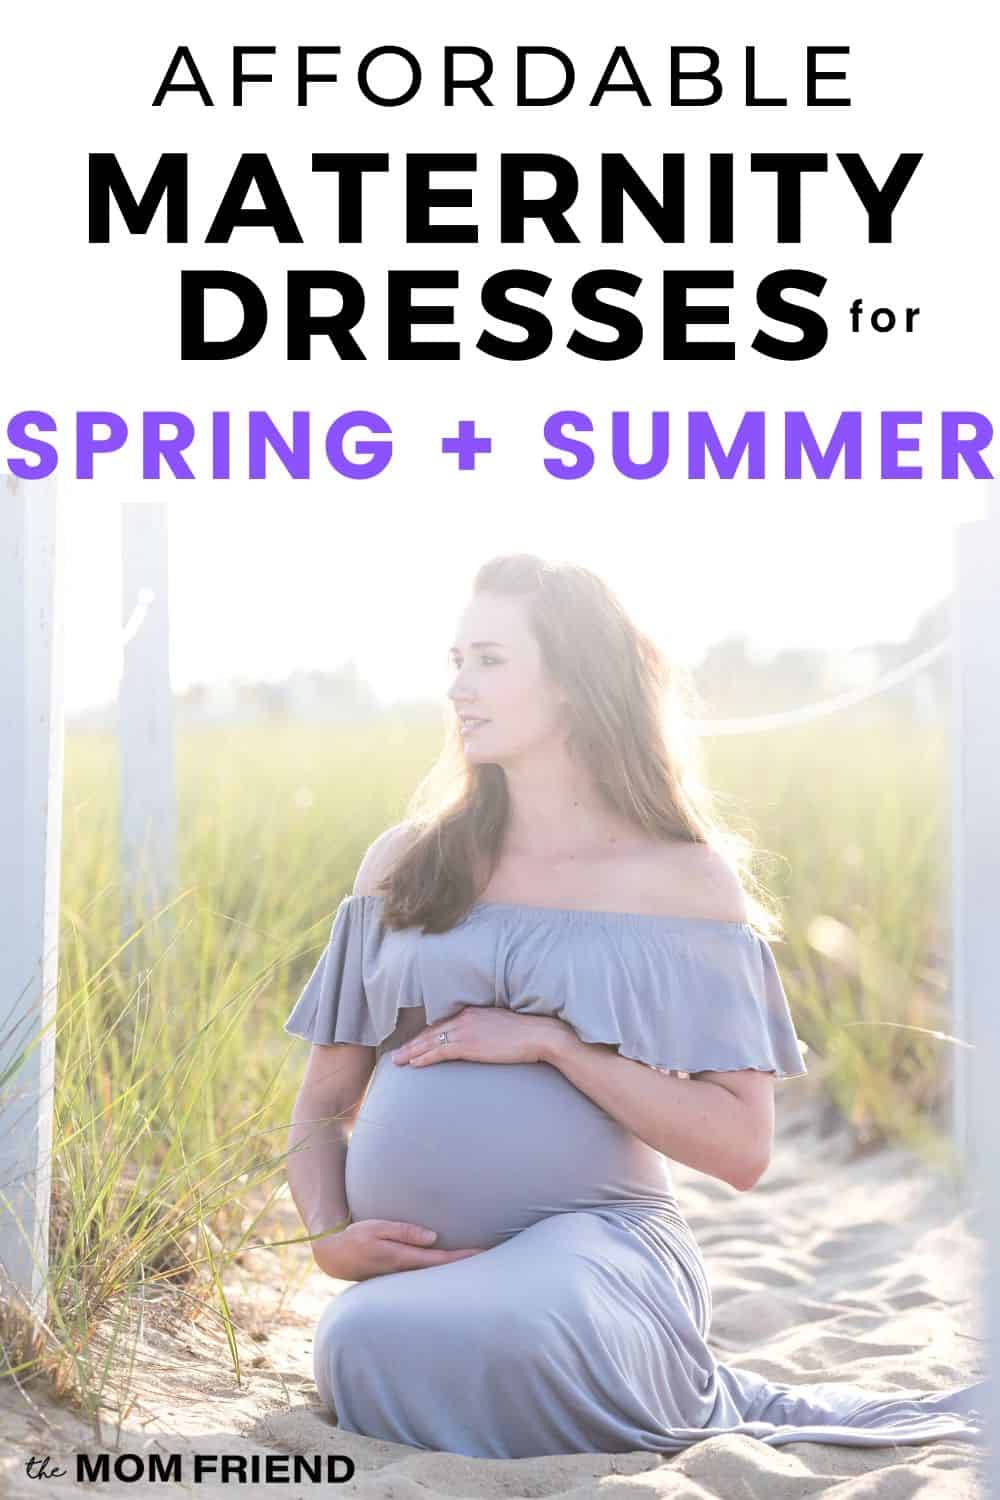 pregnant woman sitting on beach with text affordable maternity dresses for spring + summer